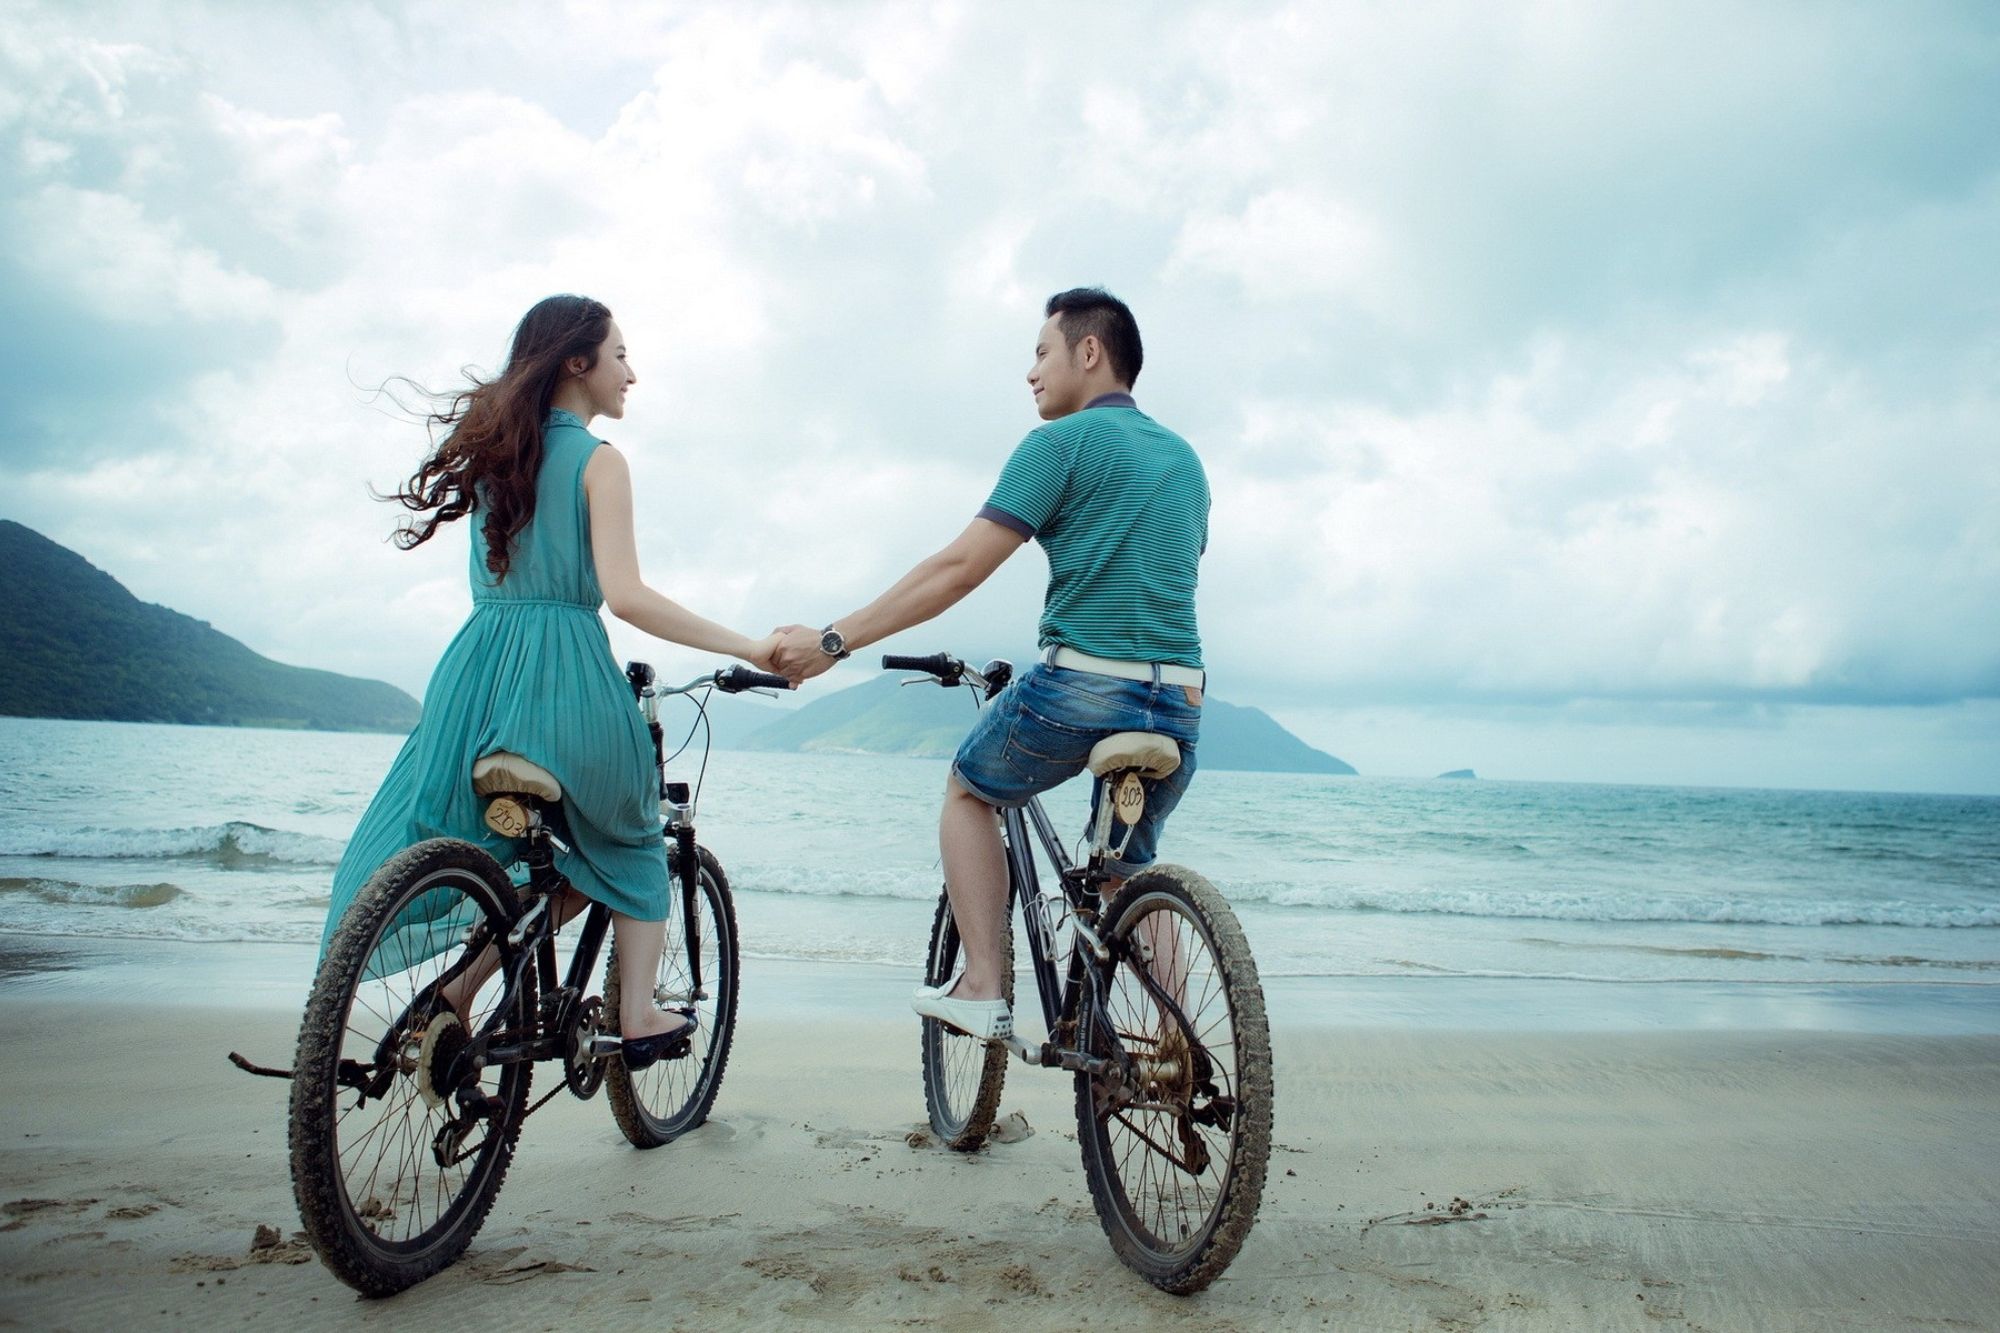 Couple pausing in their bike ride along a beach to hold hands.